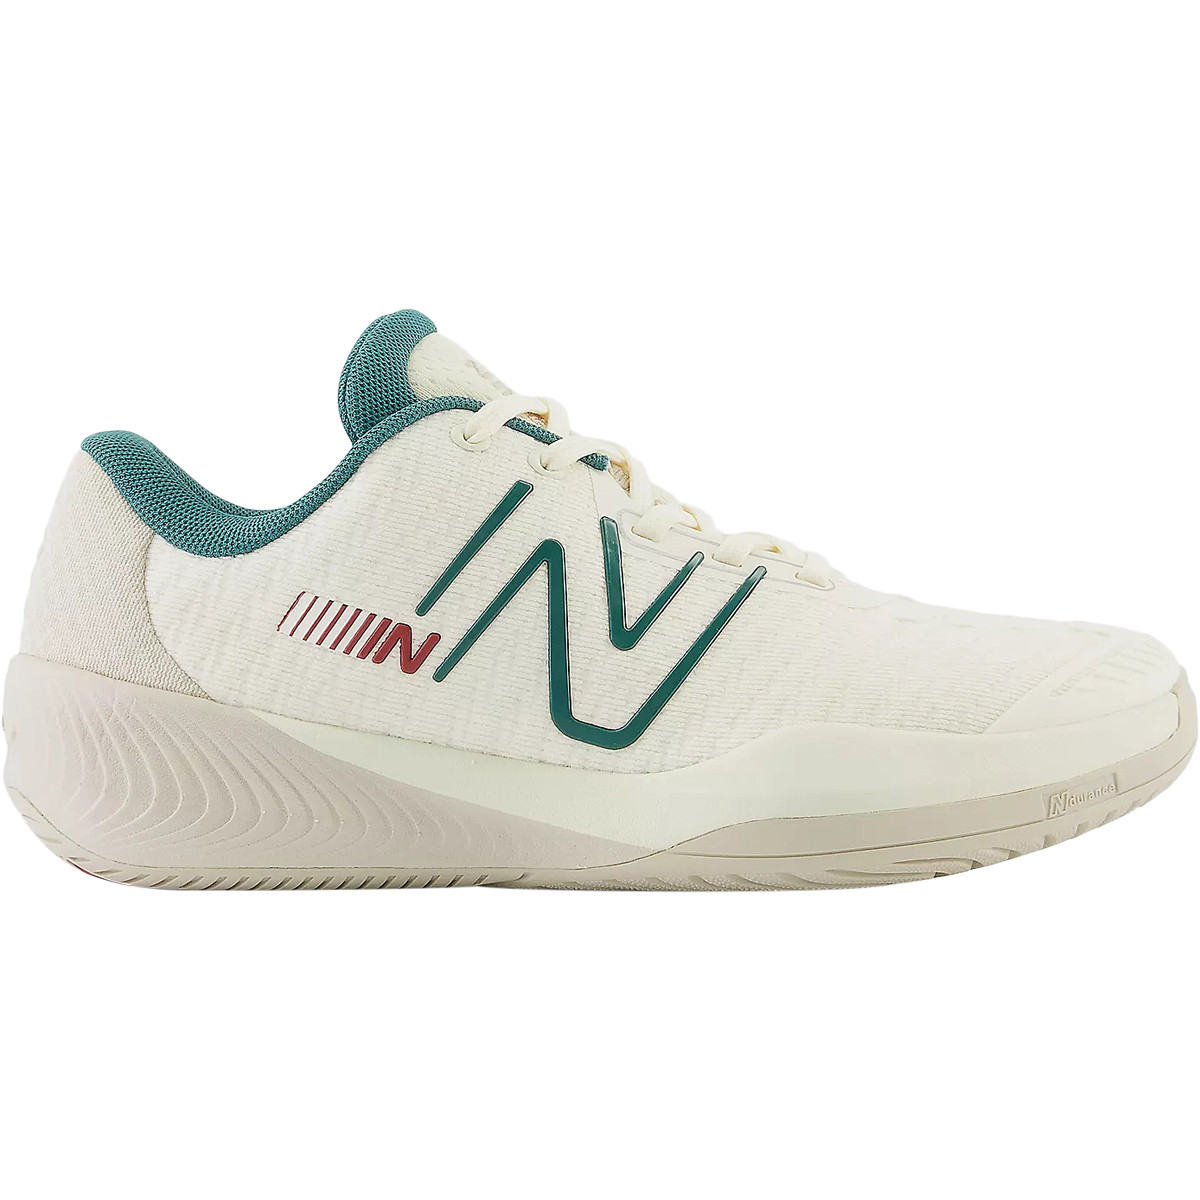 CHAUSSURES NEW BALANCE FEMME FUEL CELL 996 V5 TOUTES SURFACES - Chaussures  tennis - Tennis Achat